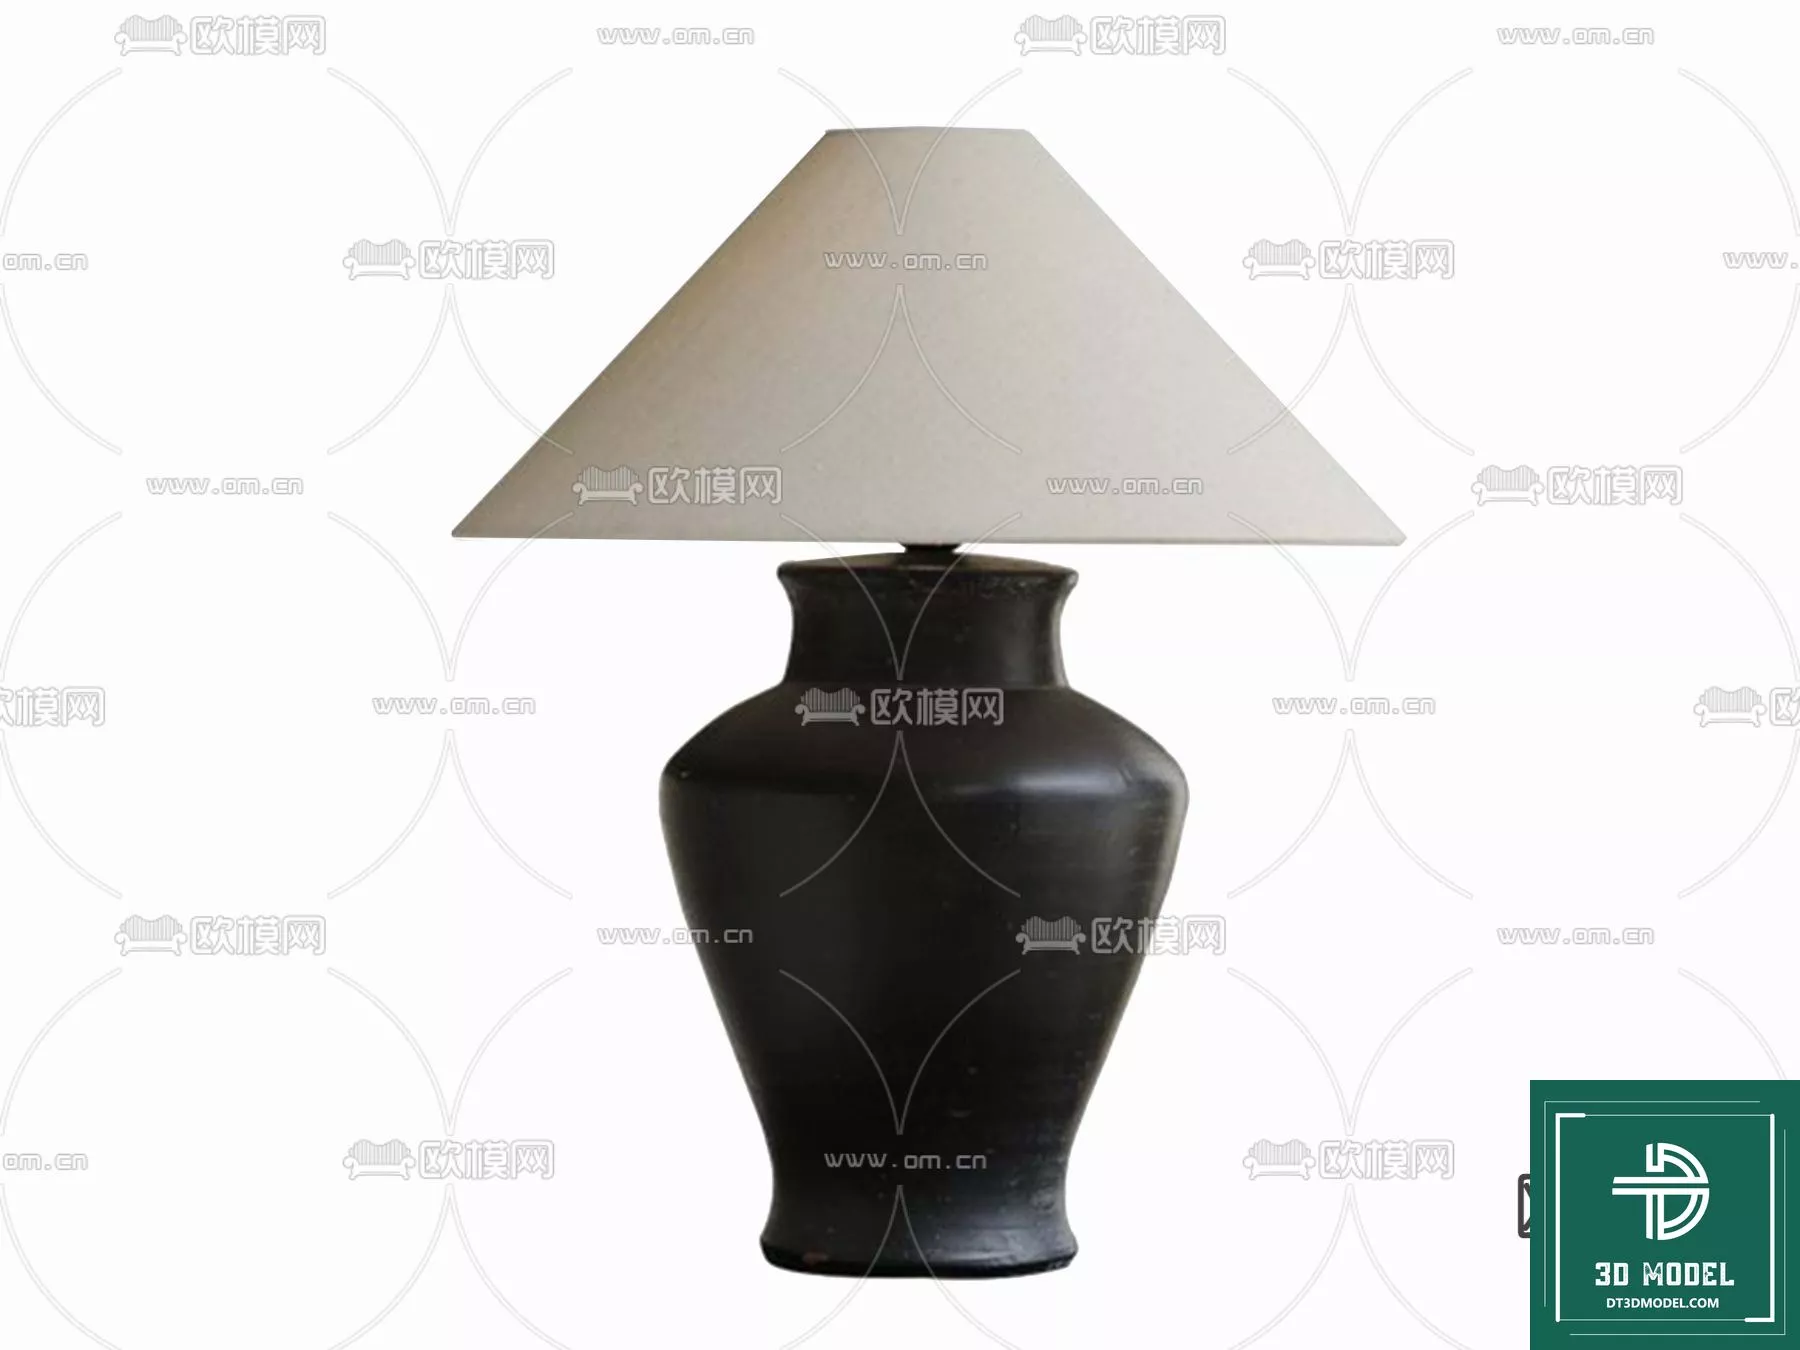 MODERN TABLE LAMP - SKETCHUP 3D MODEL - VRAY OR ENSCAPE - ID14502